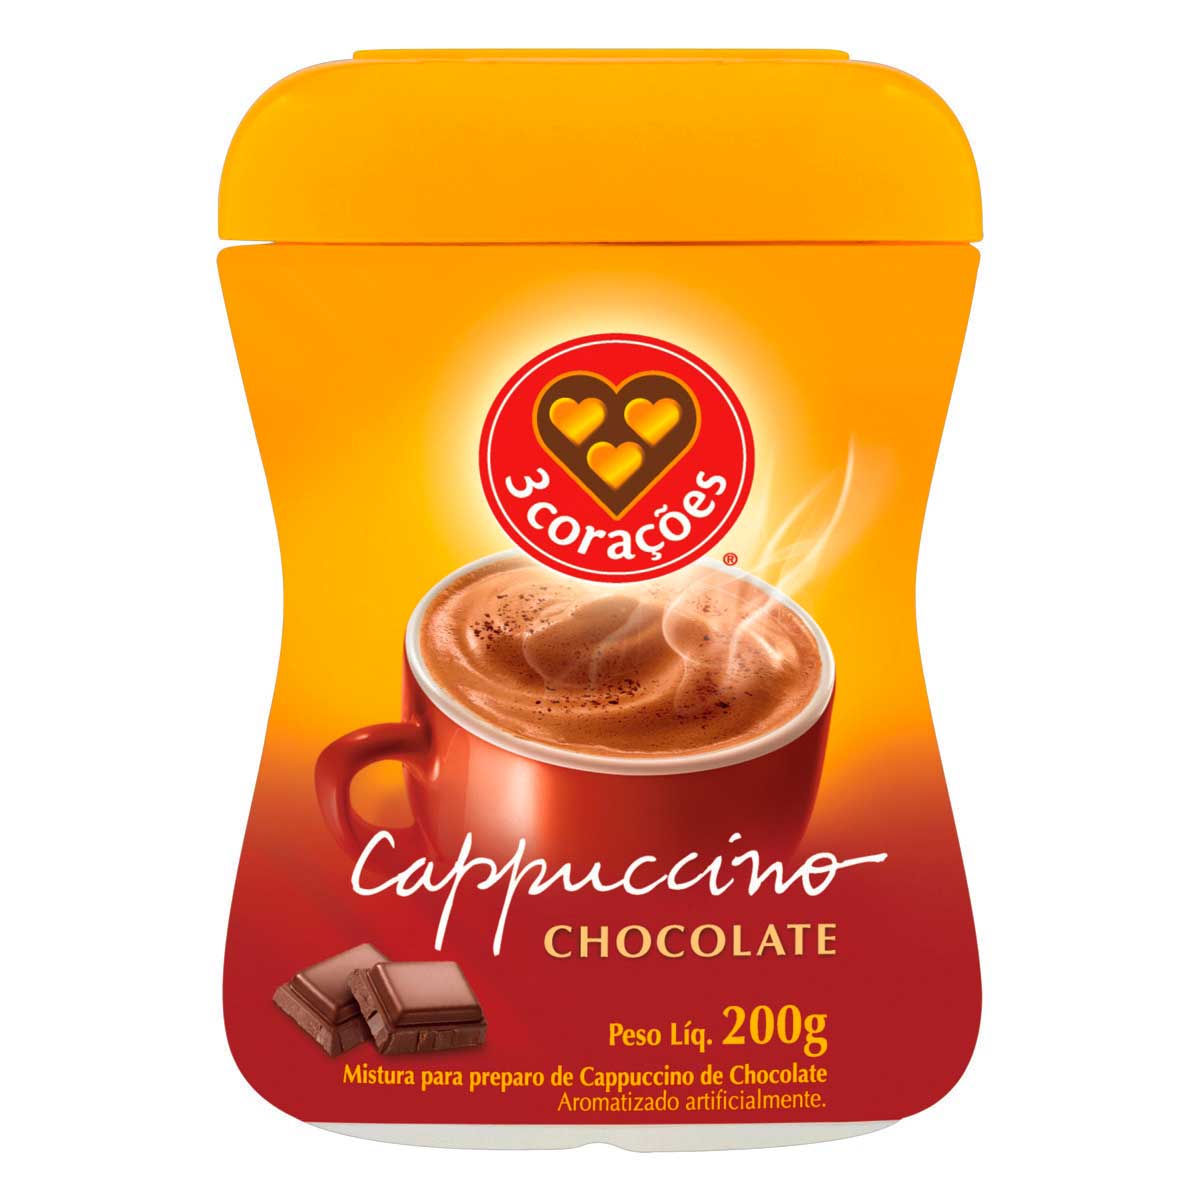 cappuccino-3-coracoes-chocolate-pote-200g-1.jpg